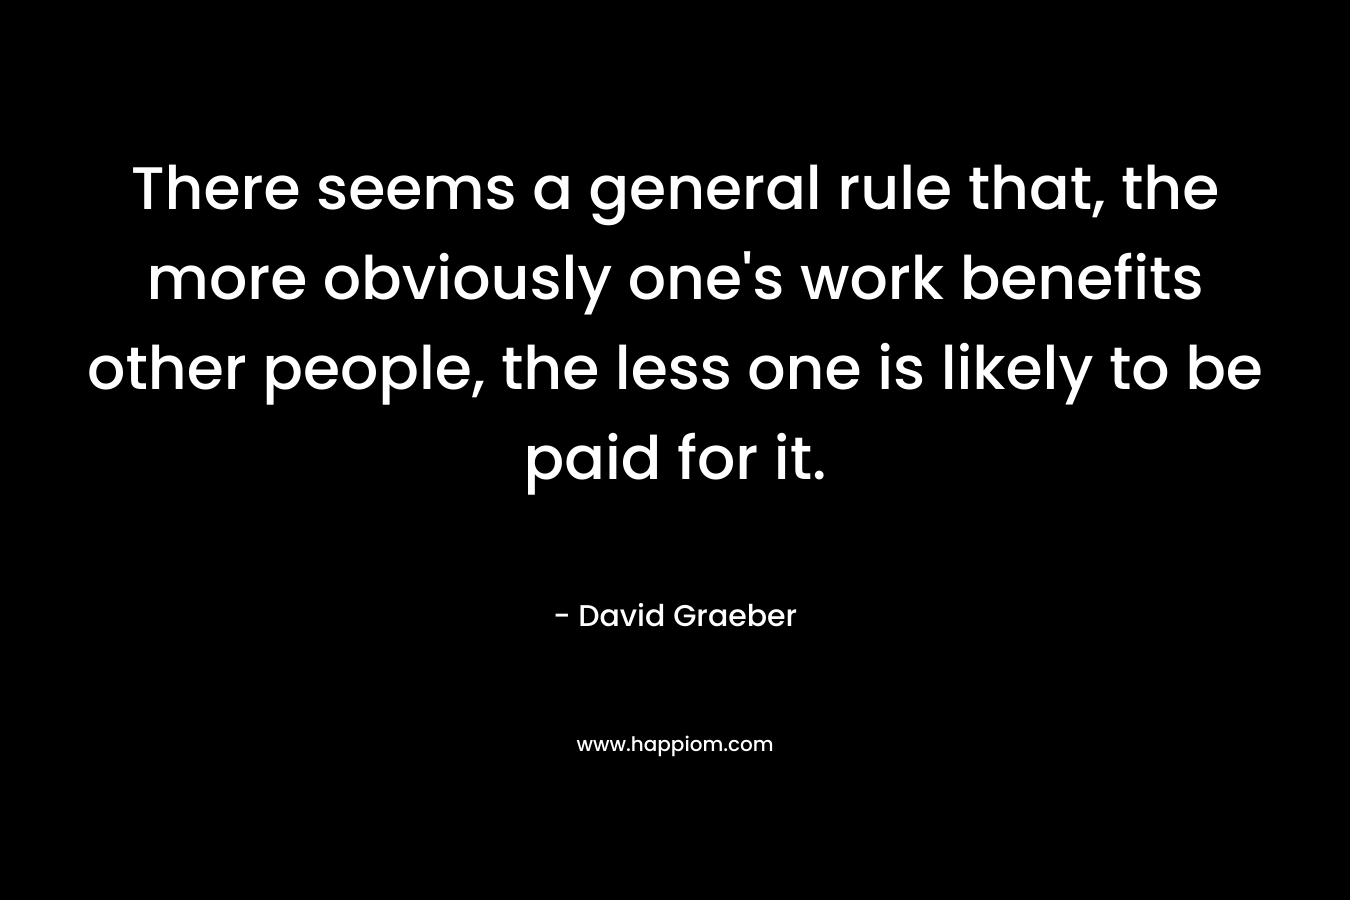 There seems a general rule that, the more obviously one’s work benefits other people, the less one is likely to be paid for it. – David Graeber